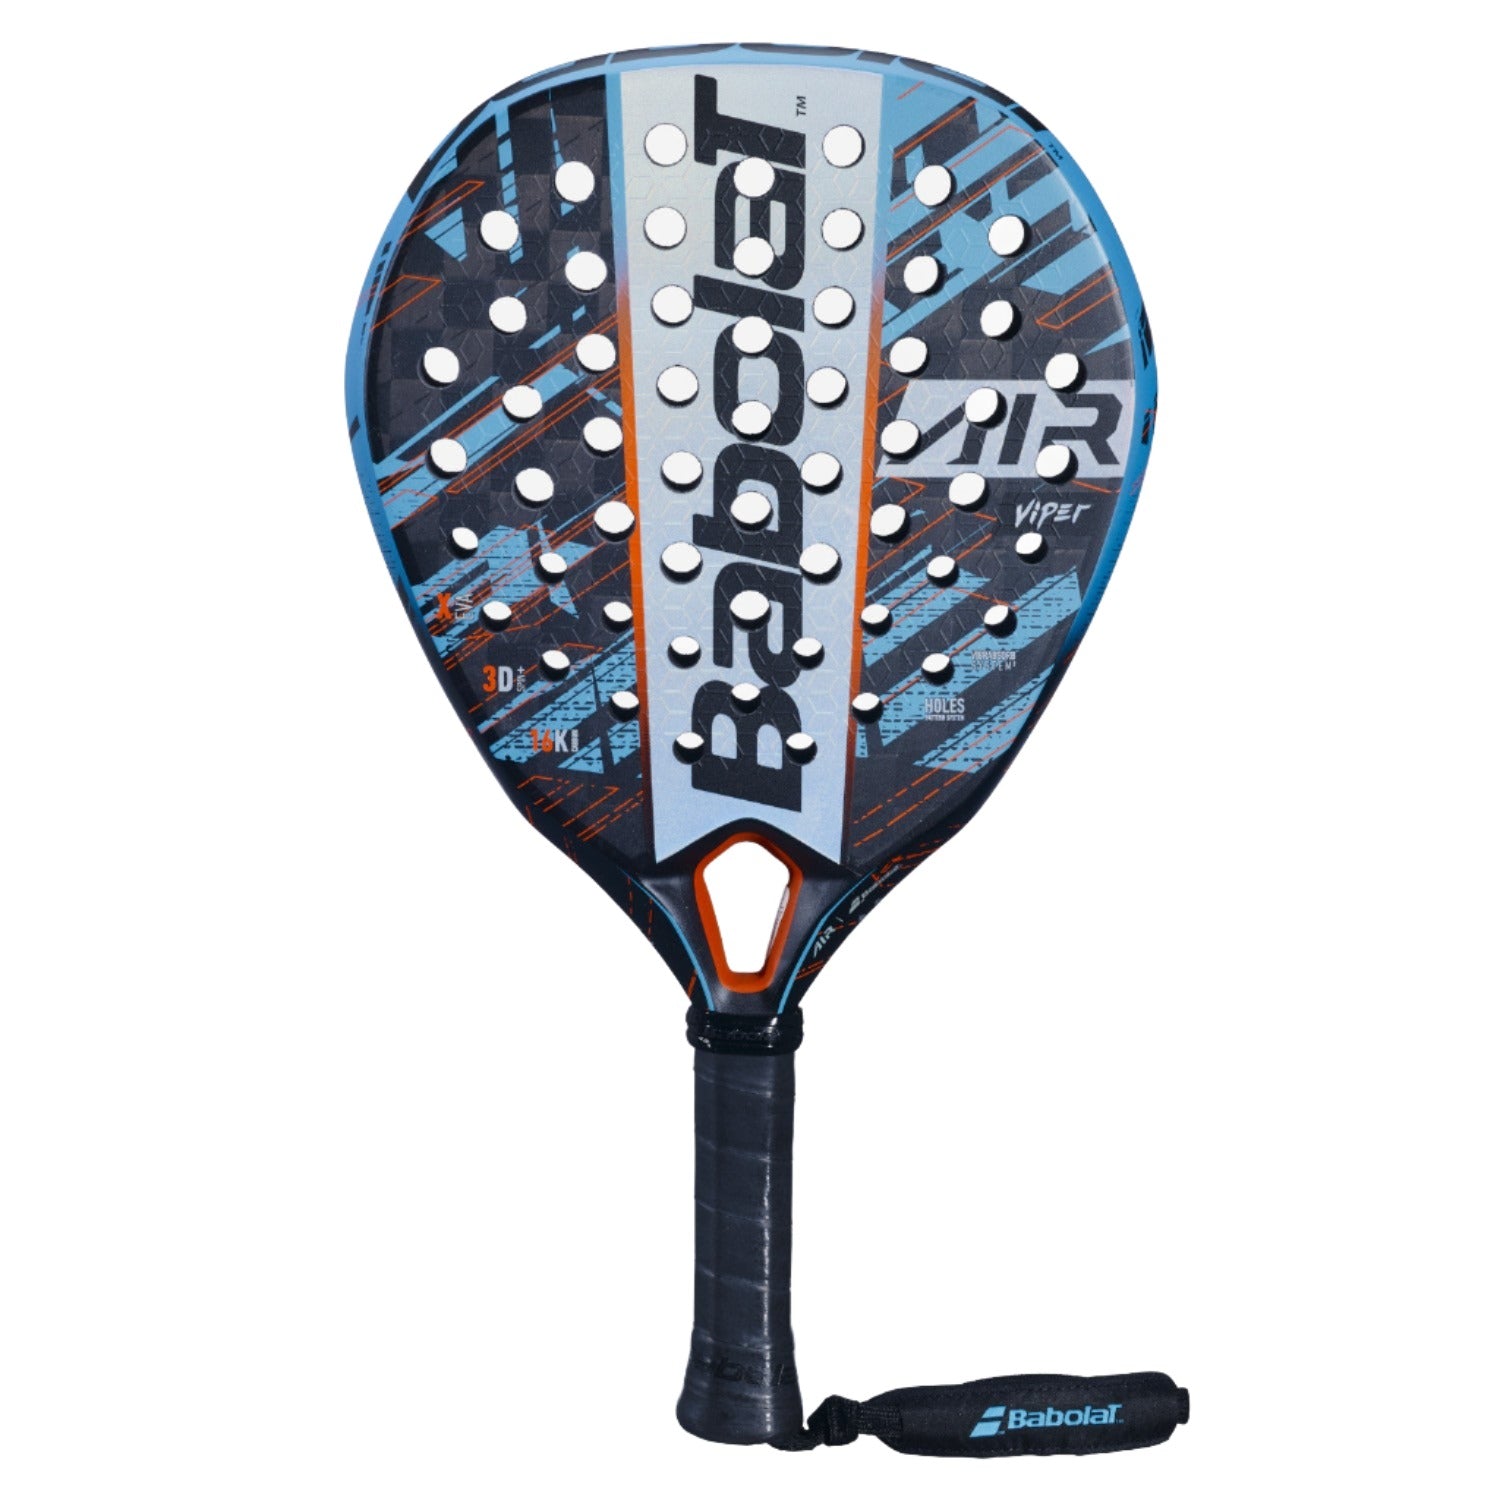 front  image of the Babolat Air Viper 2023 padel racket on sale at Thepadelshop.co.nz